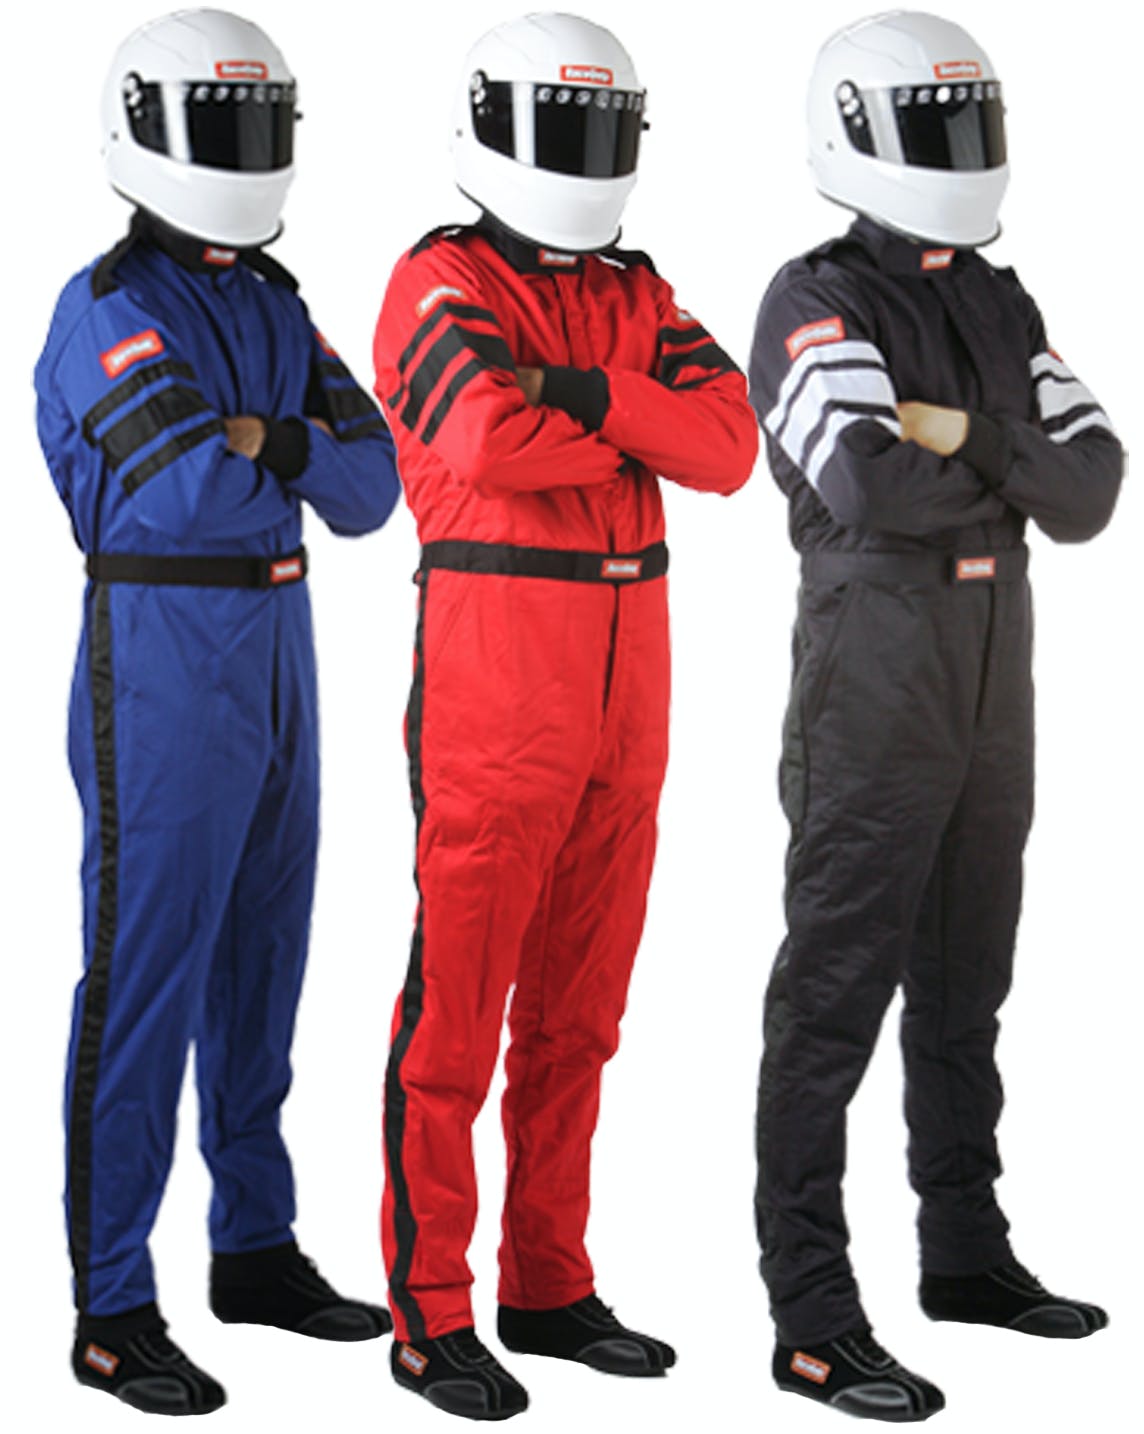 RaceQuip 120028 SFI-5 Pyrovatex One-Piece Multi-Layer Racing Fire Suit (Blue, 3X-Large)